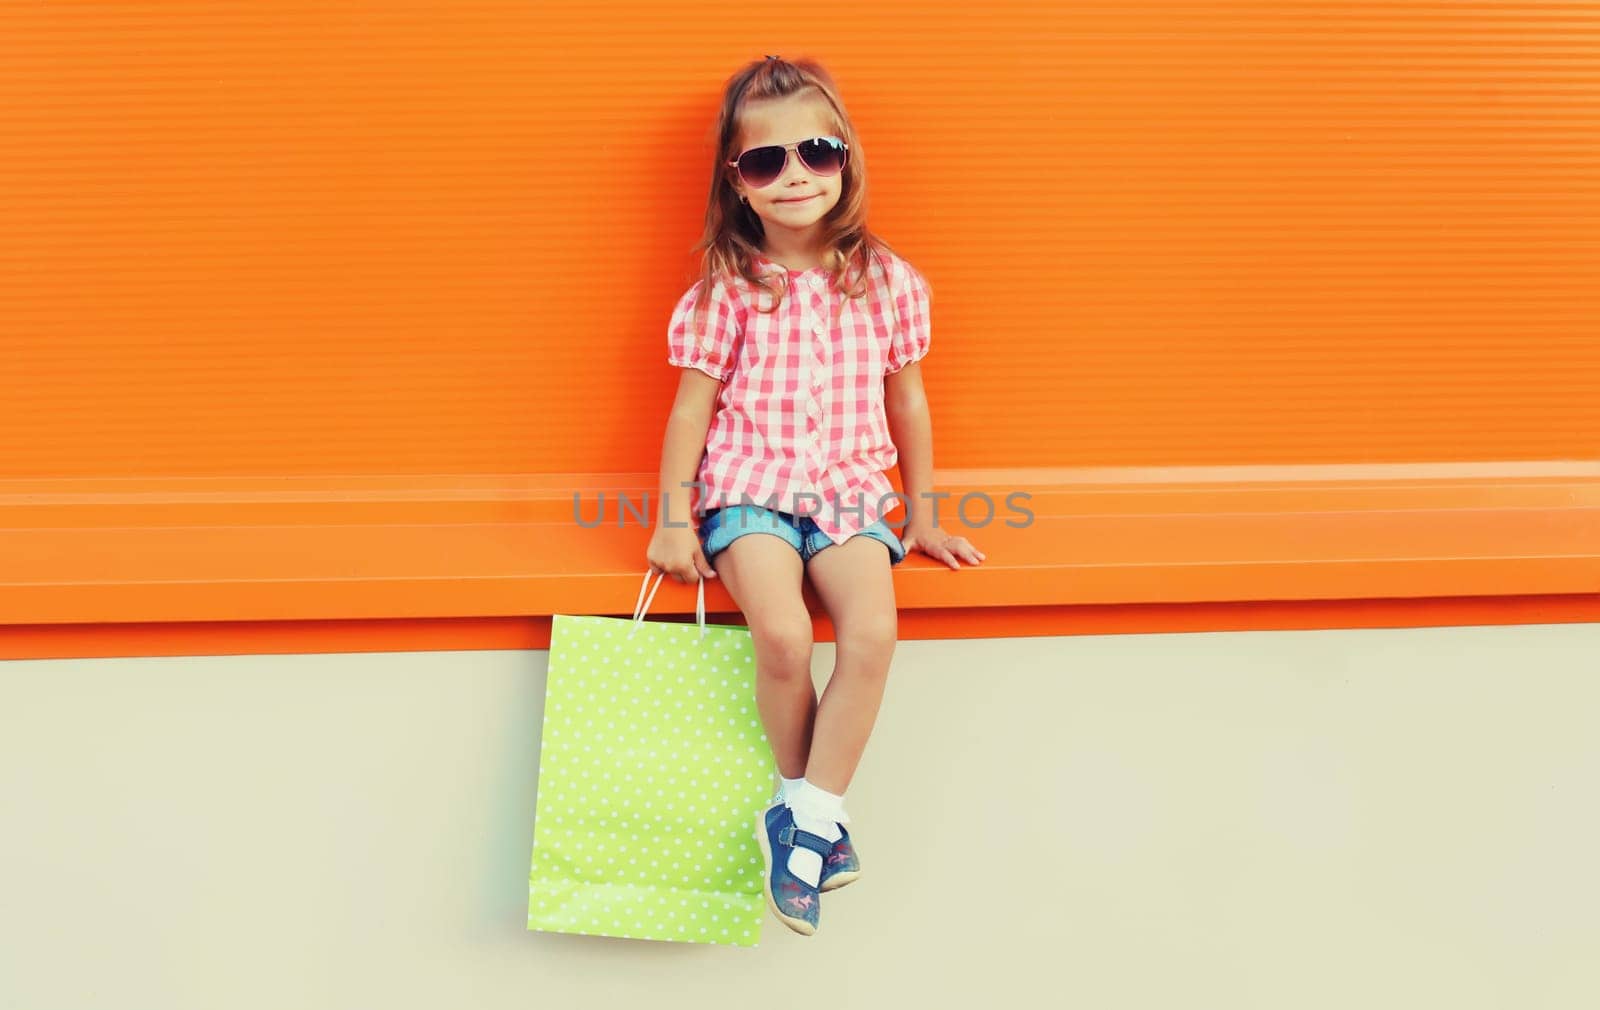 Little girl child with shopping bags posing on city street by Rohappy